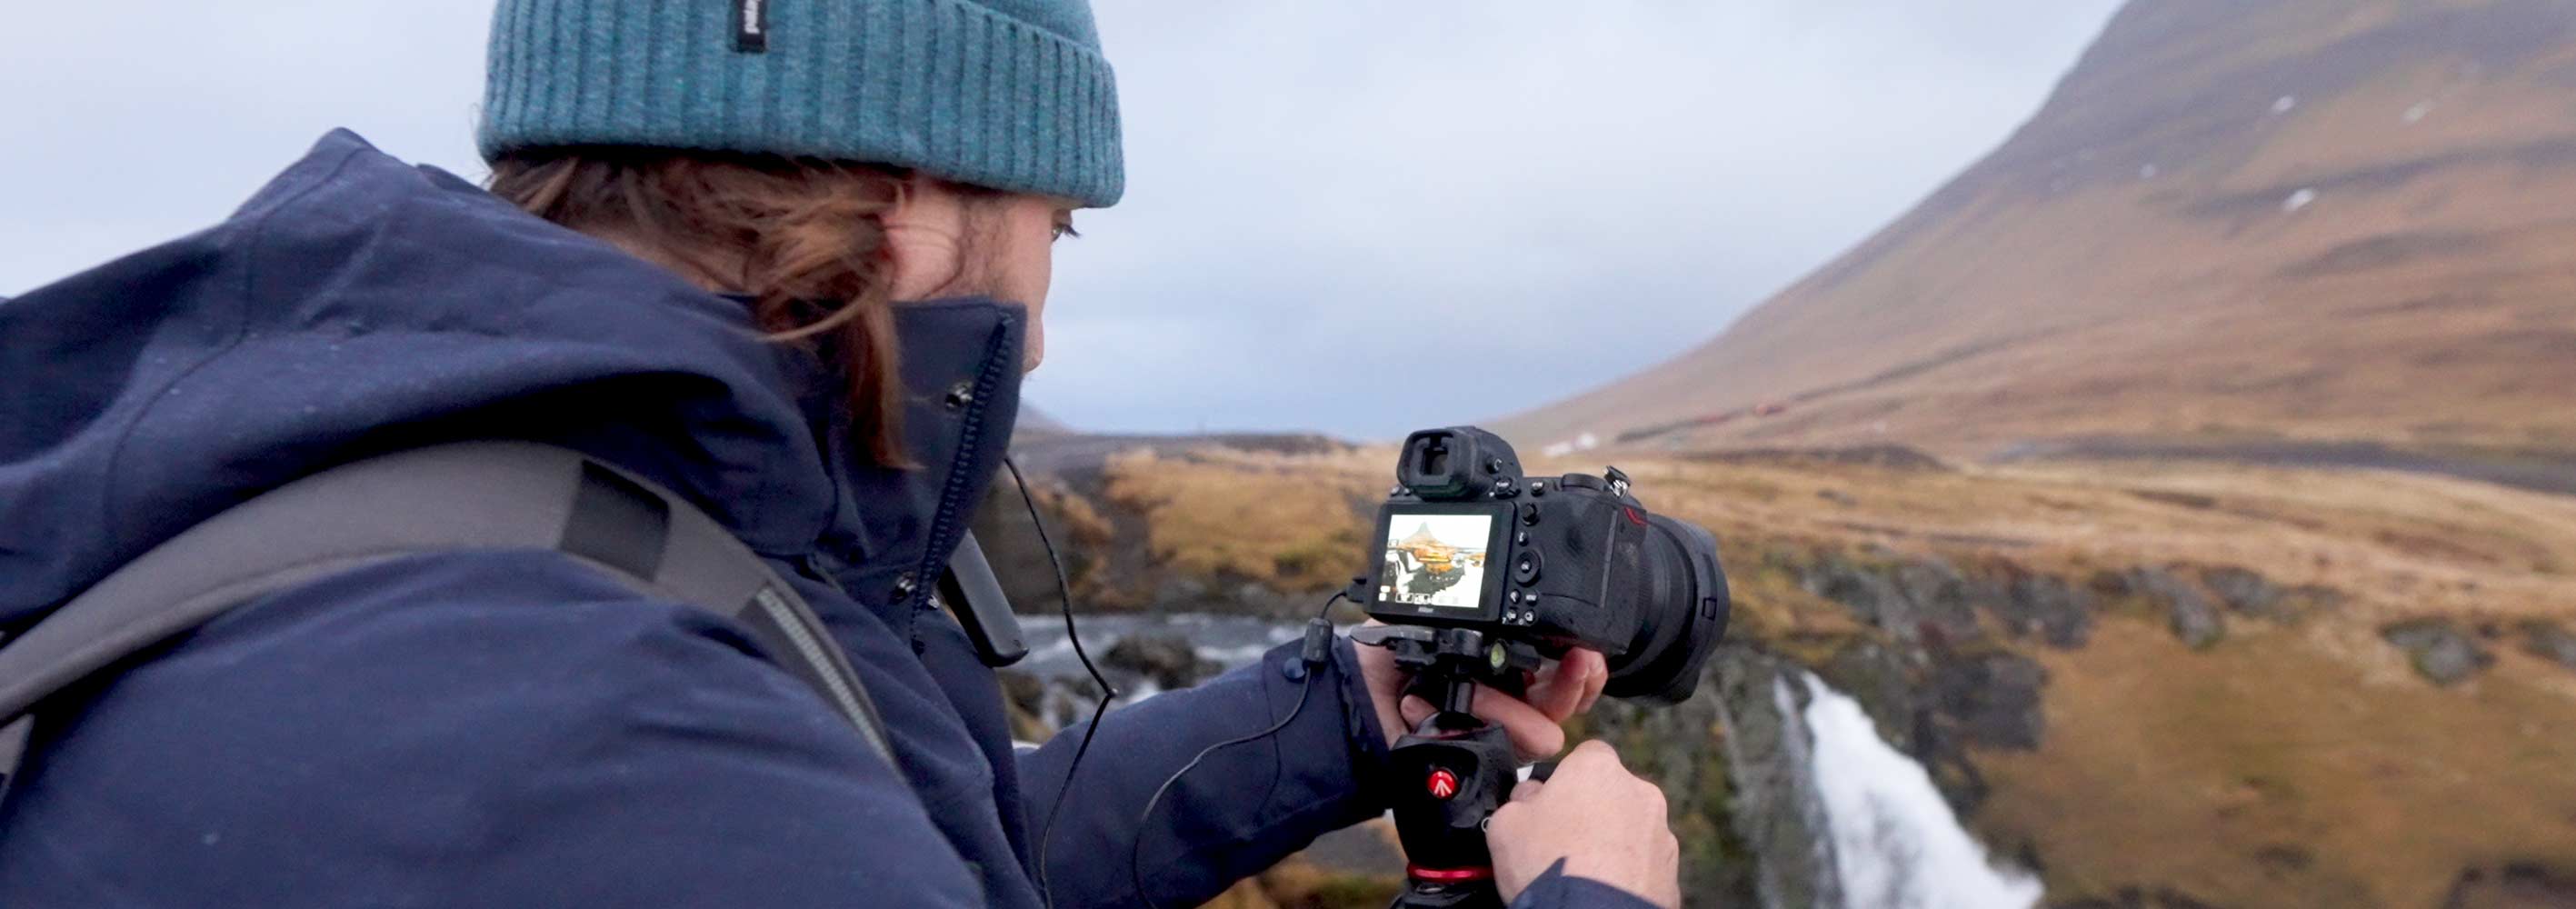 Rachid Dahnoun shooting on assignment for Lowepro in Iceland